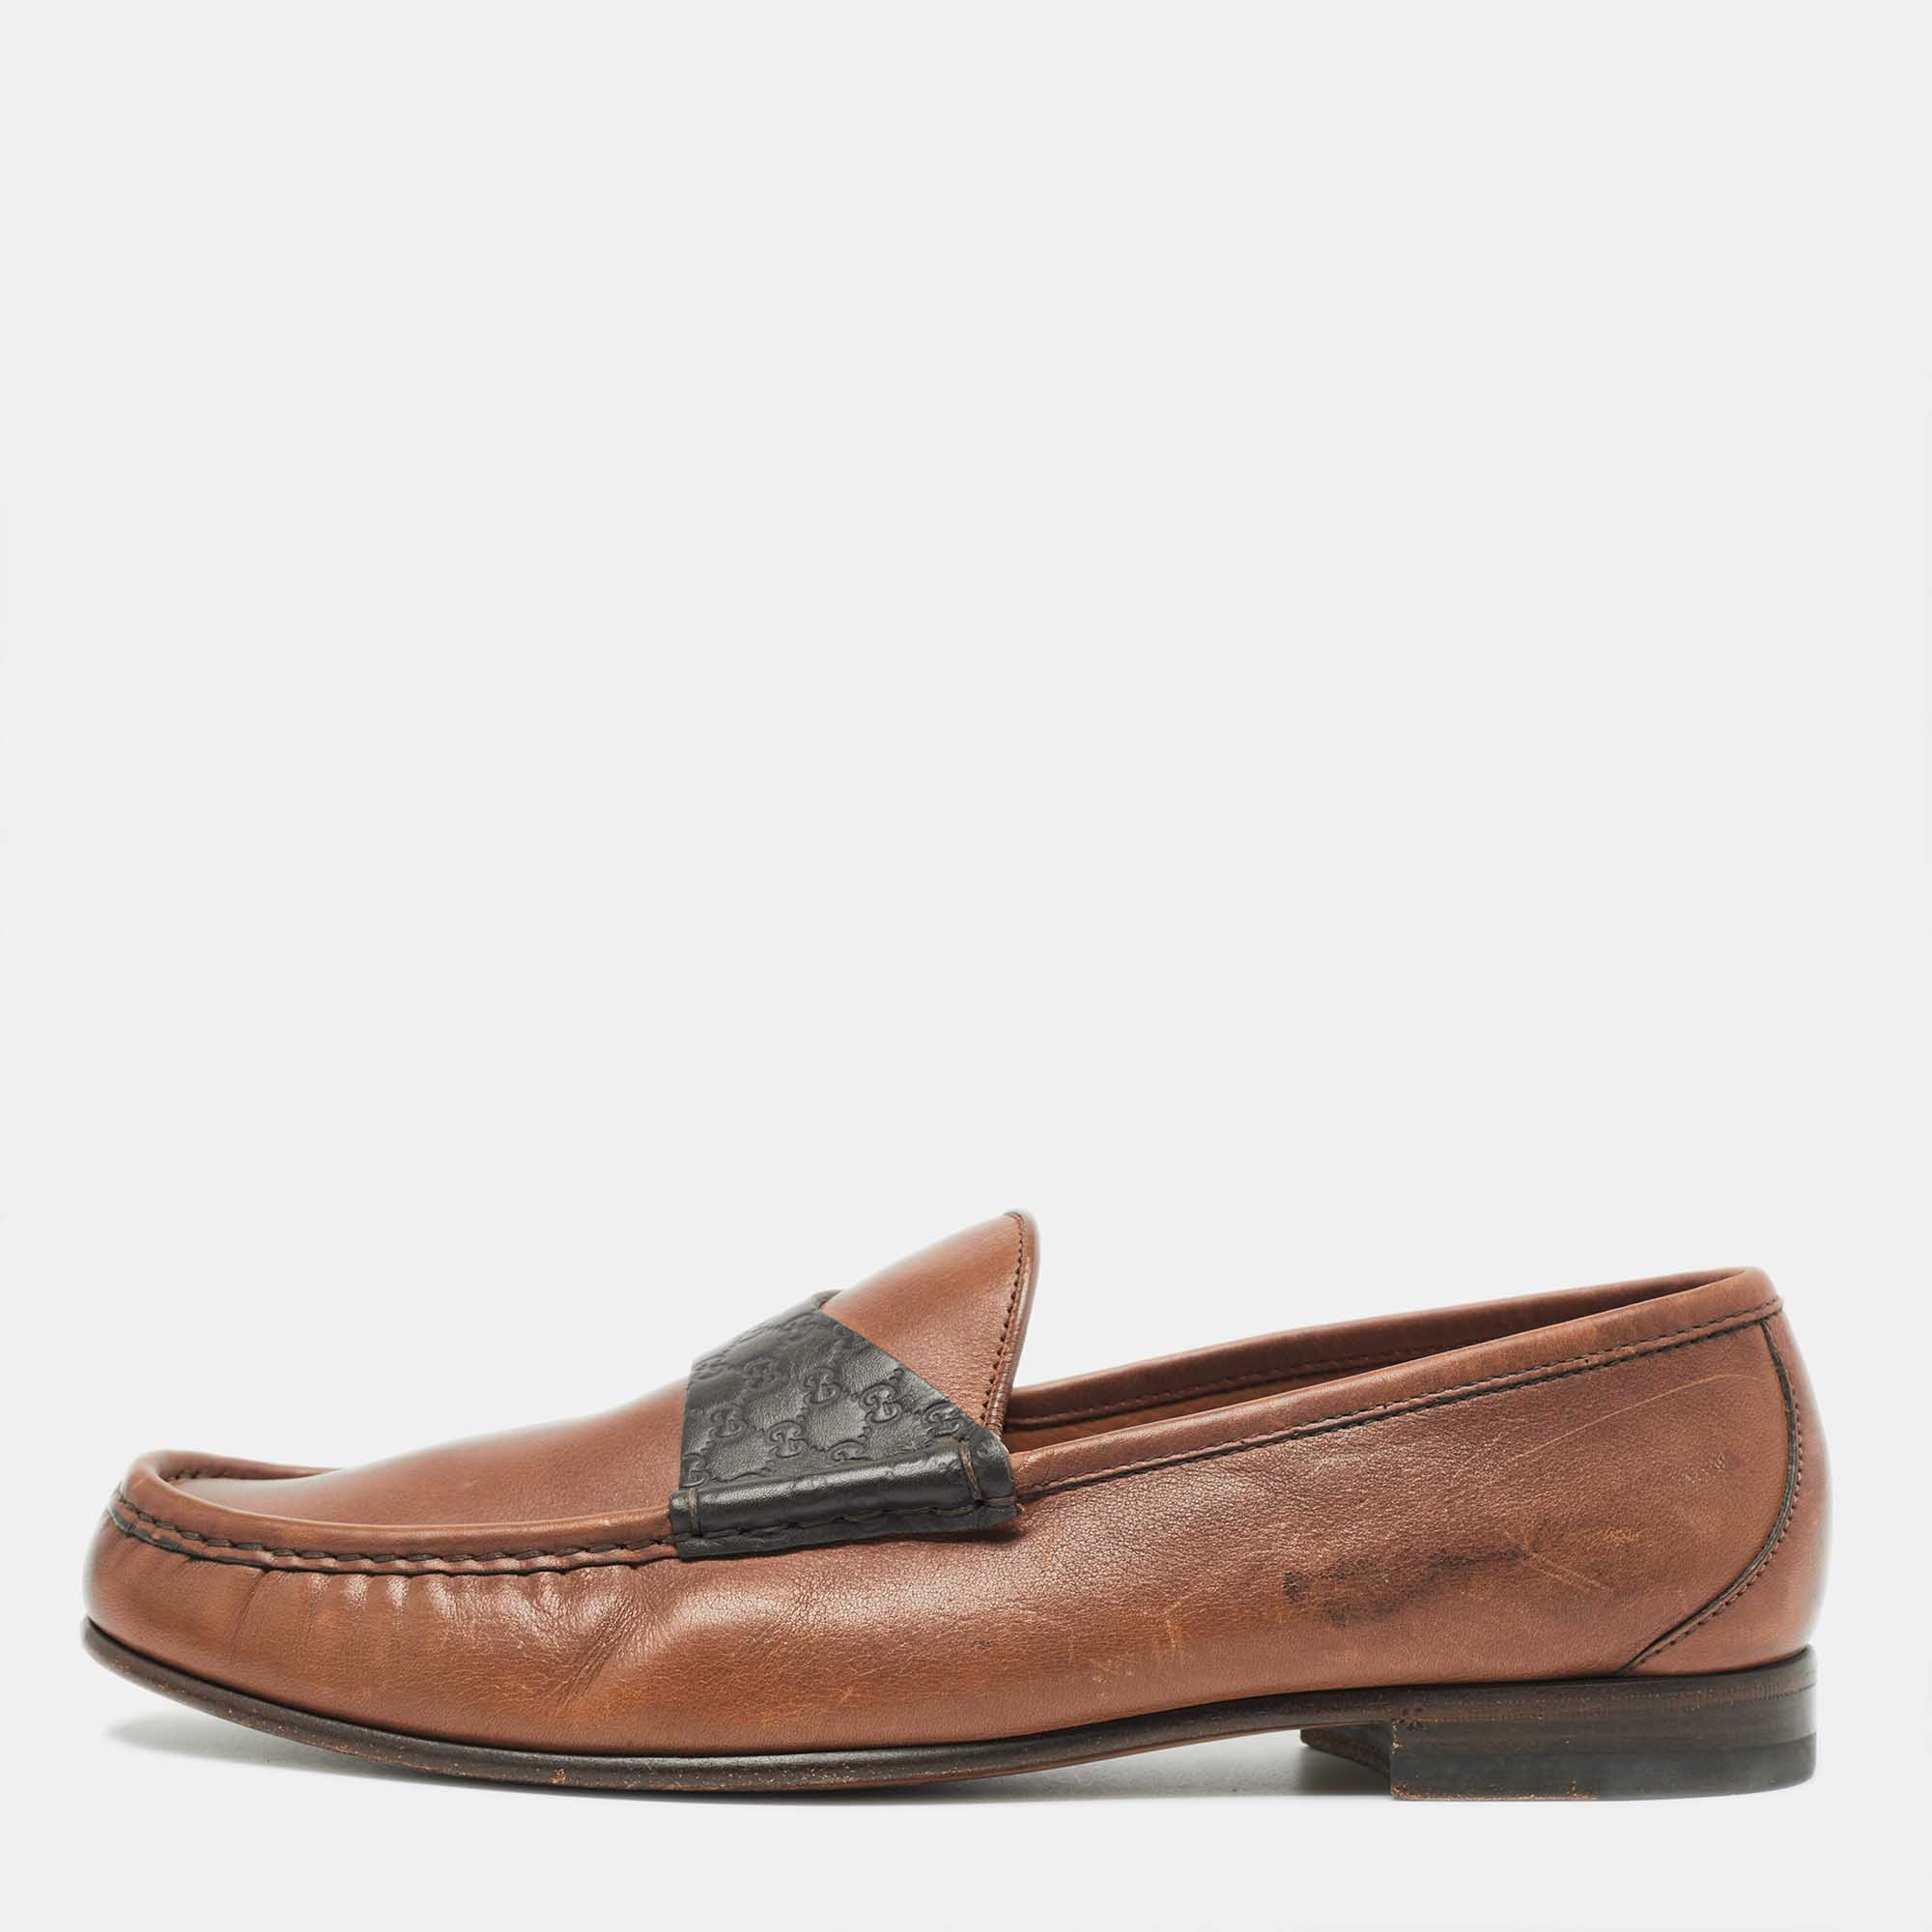 Gucci brown leather slip on loafers size 42